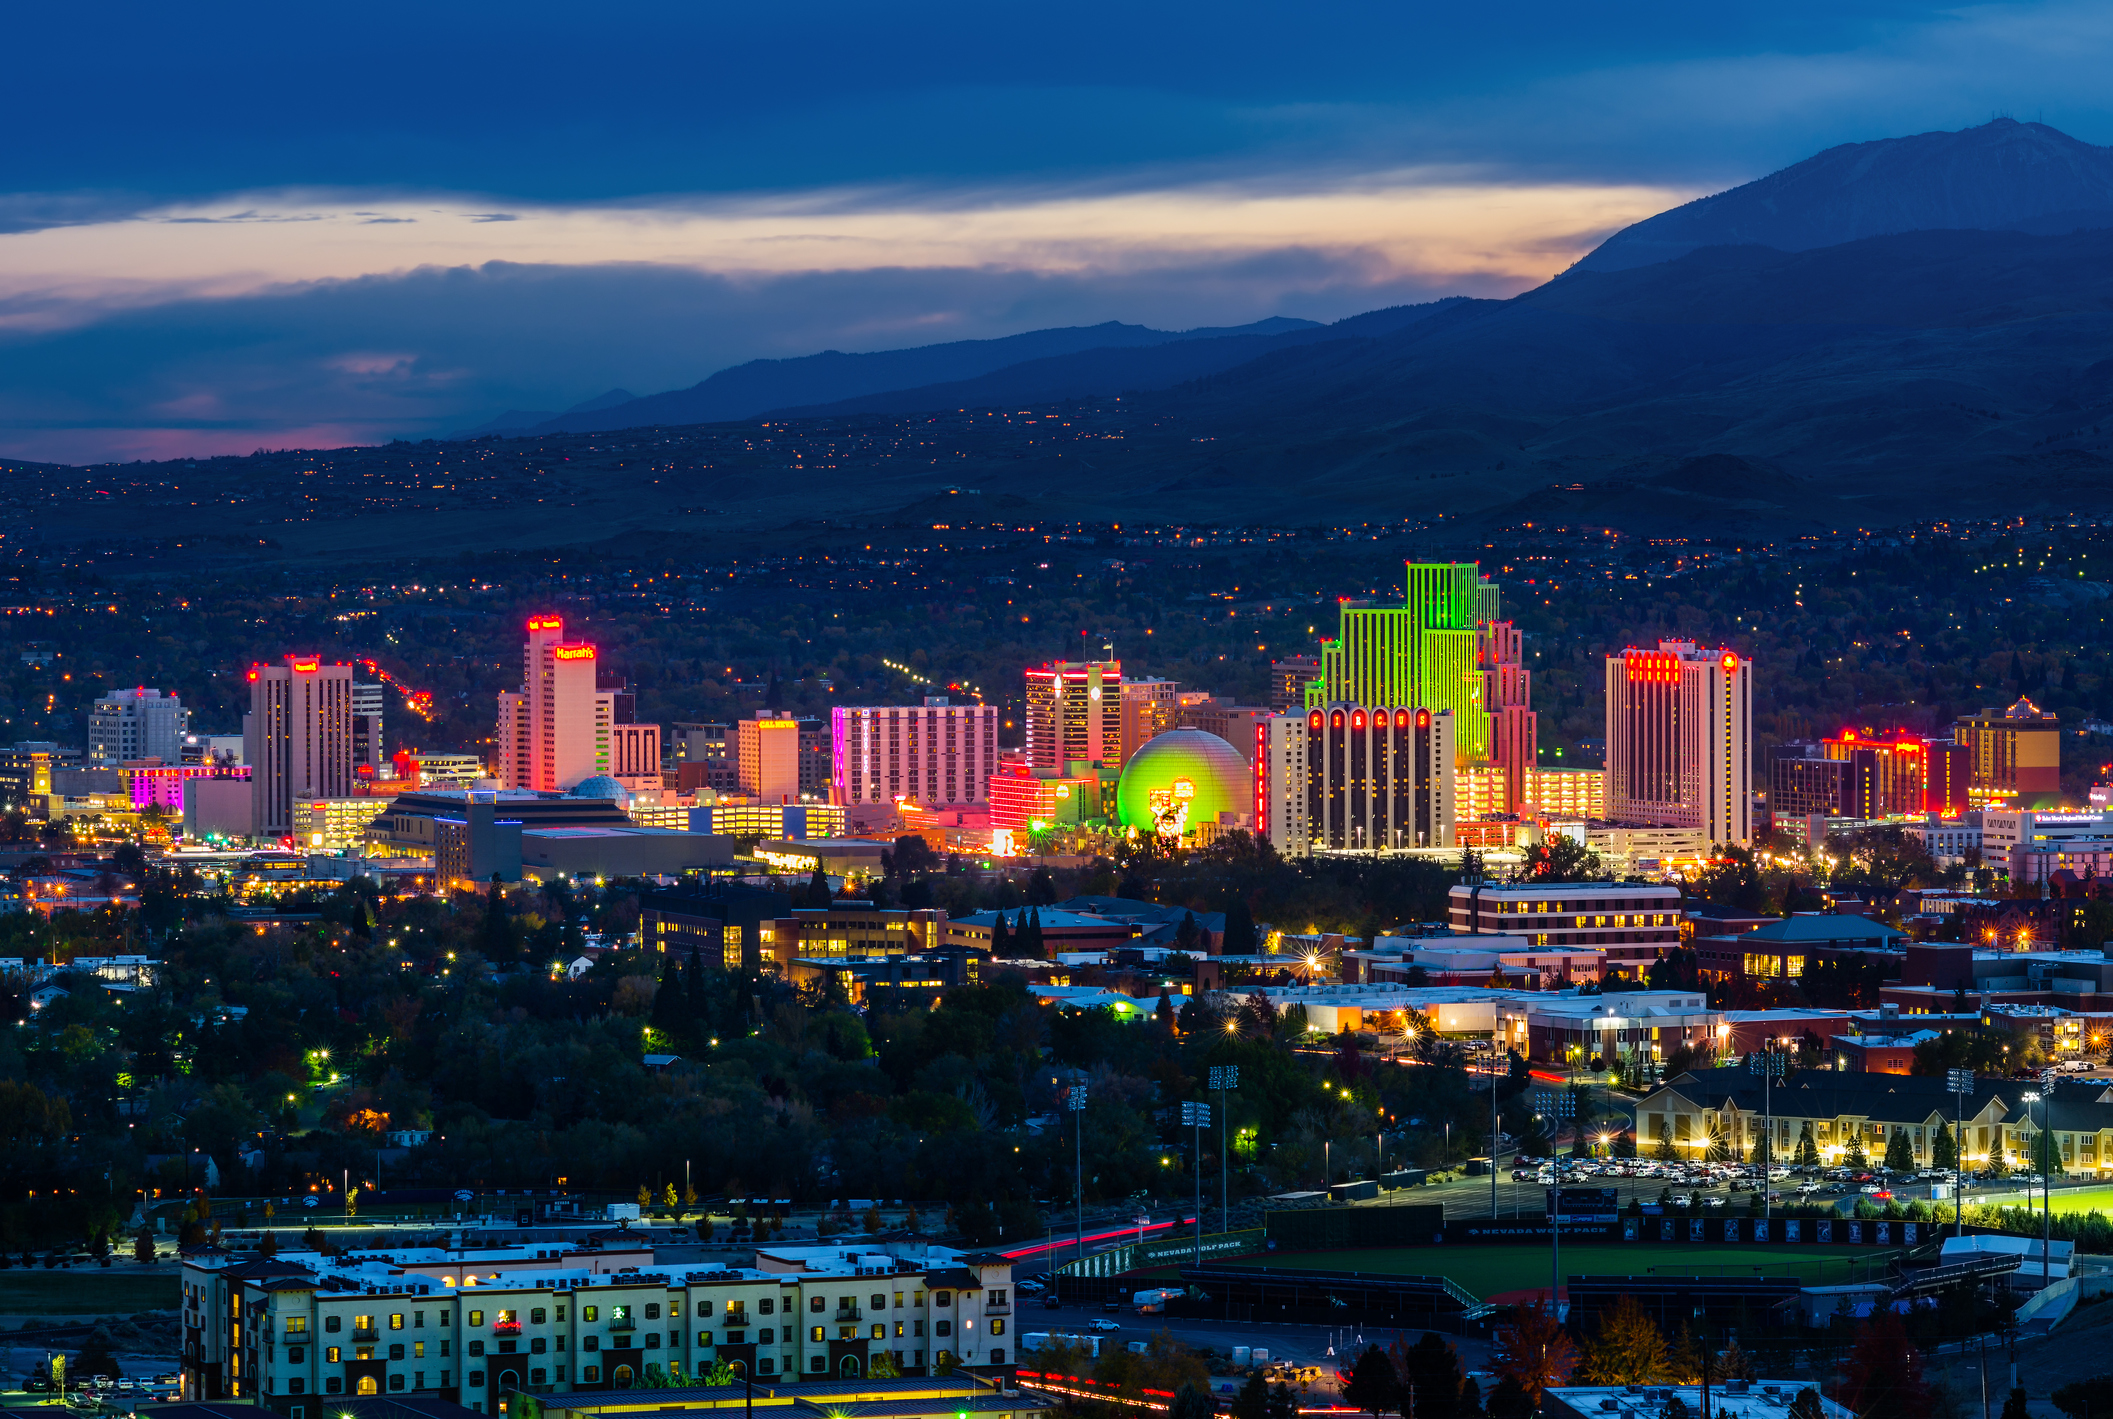 An aerial shot of Reno at night. Skyscrapers, most containing gaming, are lit up in neon colors.